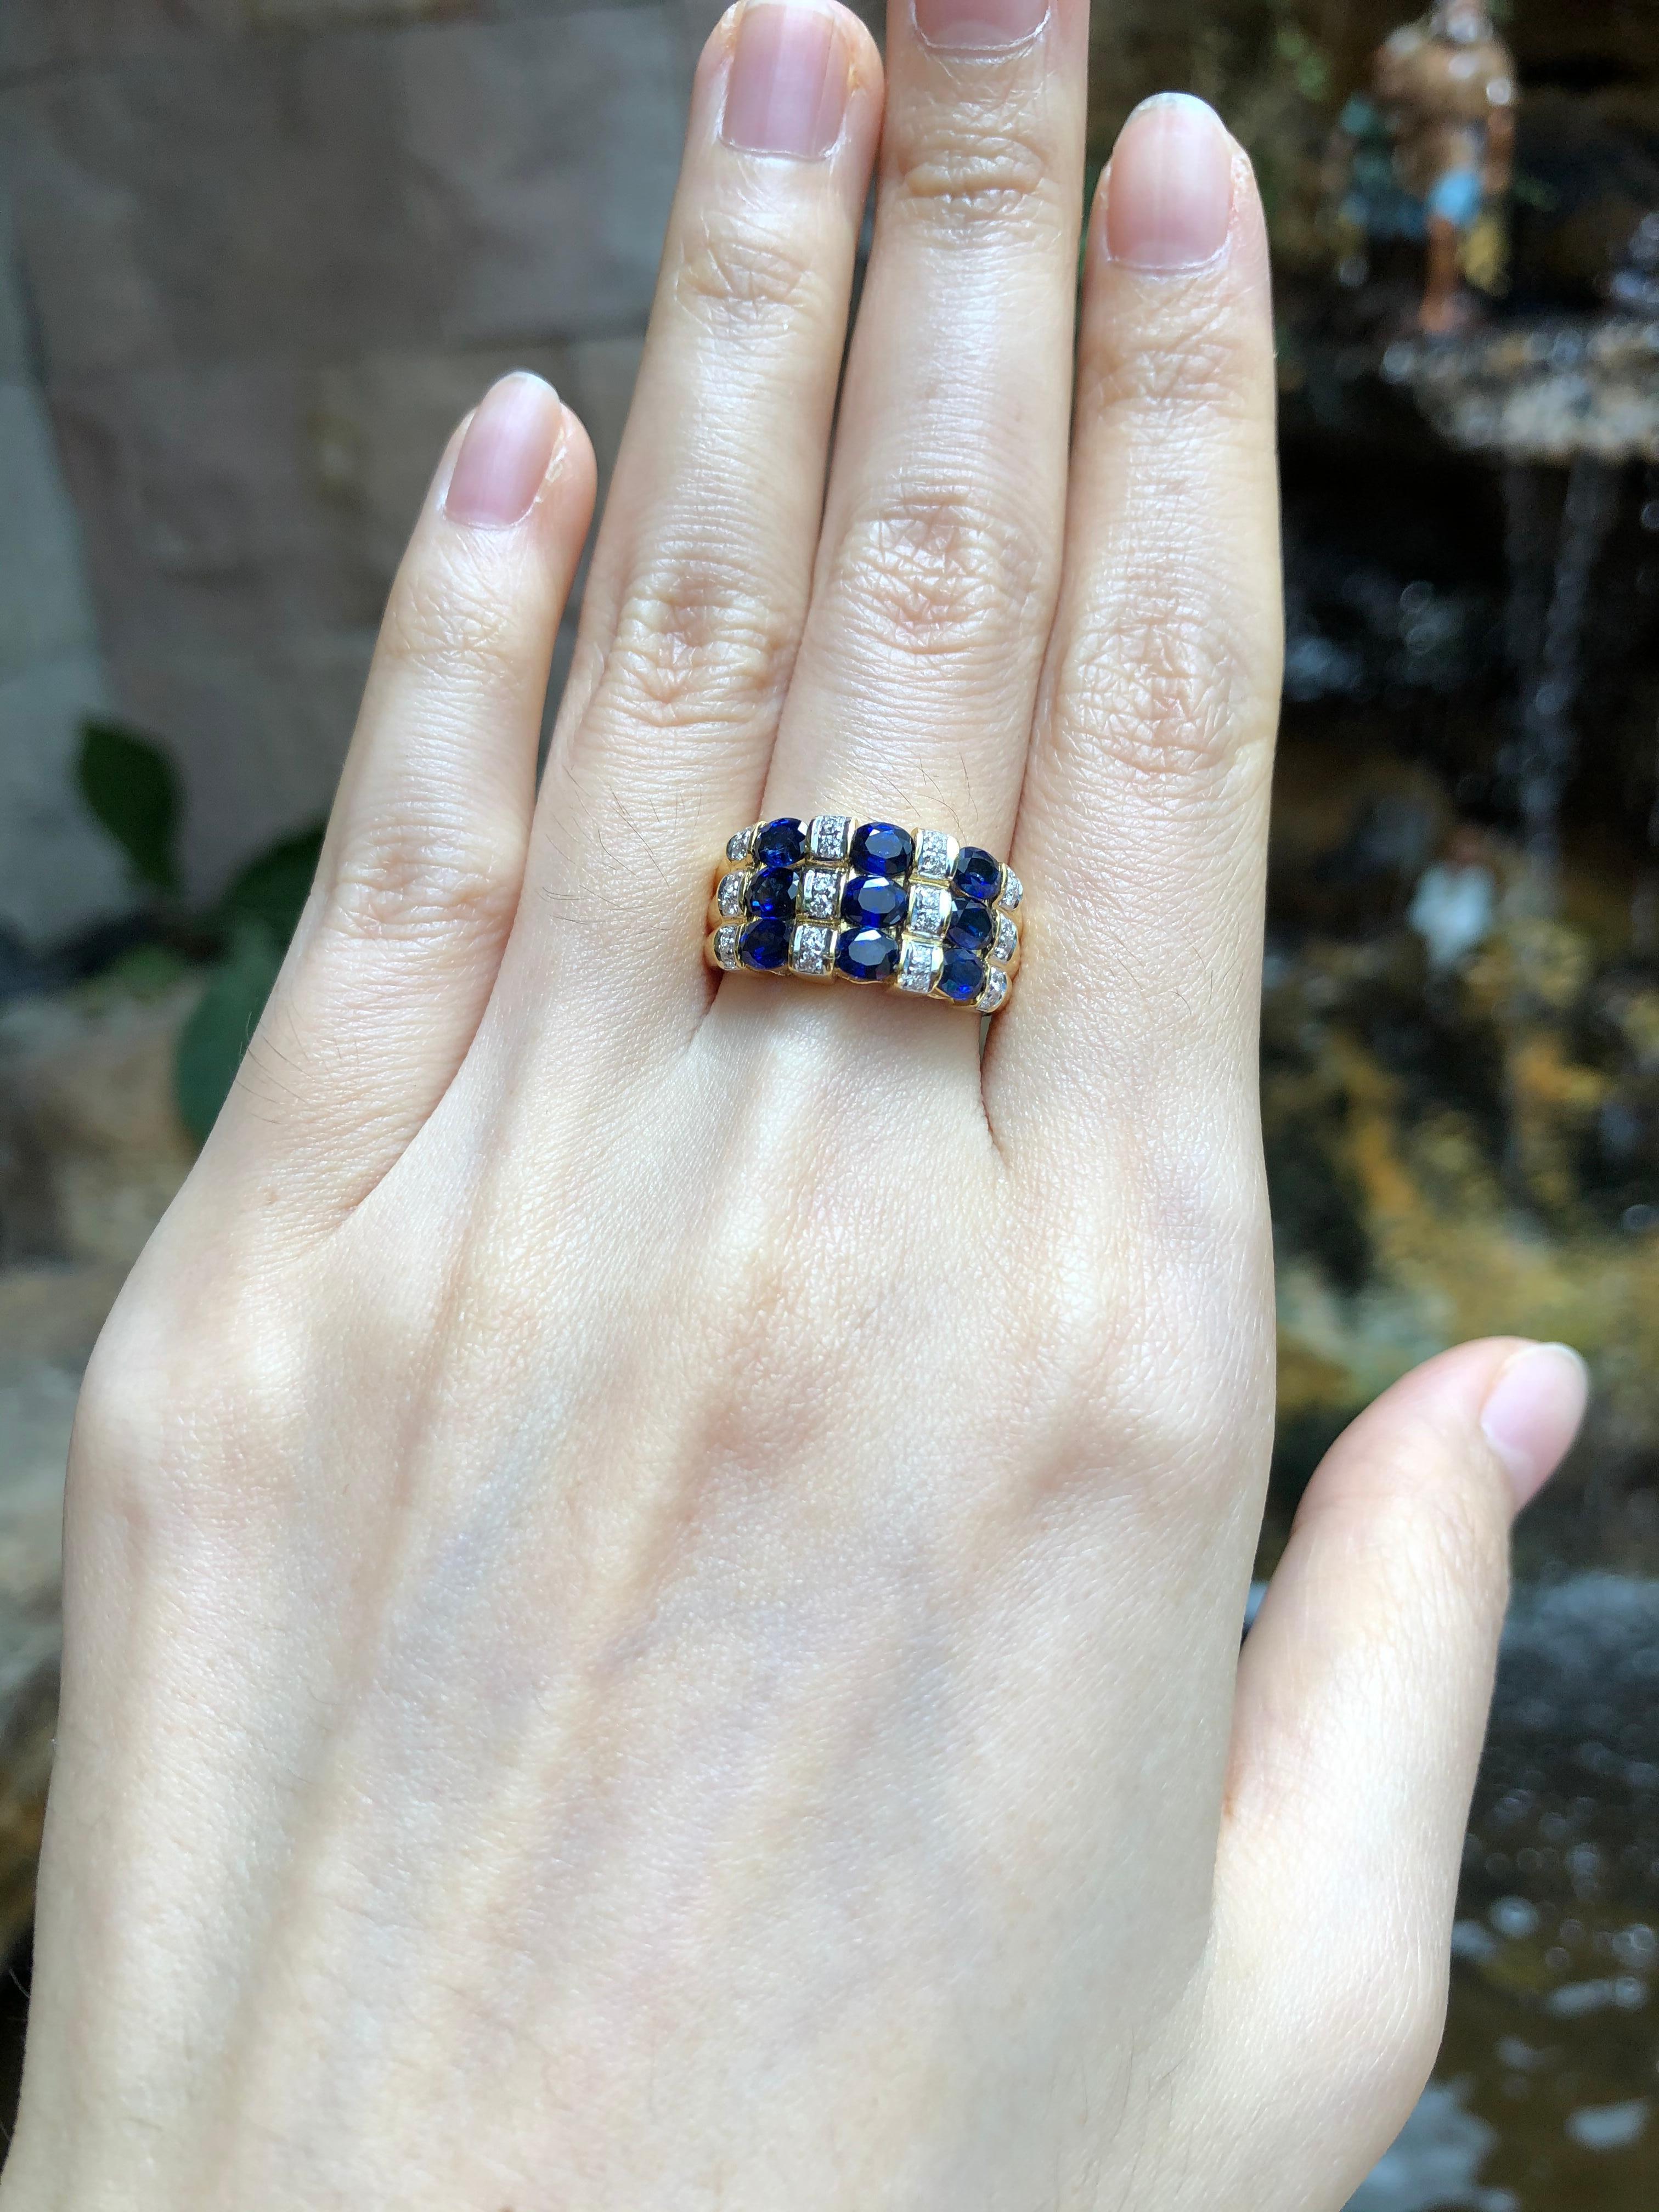 Blue Sapphire 2.19 carats with Diamond 0.22 carat Ring set in 18 Karat Gold Settings

Width:  1.8 cm 
Length: 0.9 cm
Ring Size: 53
Total Weight: 8.91 grams

